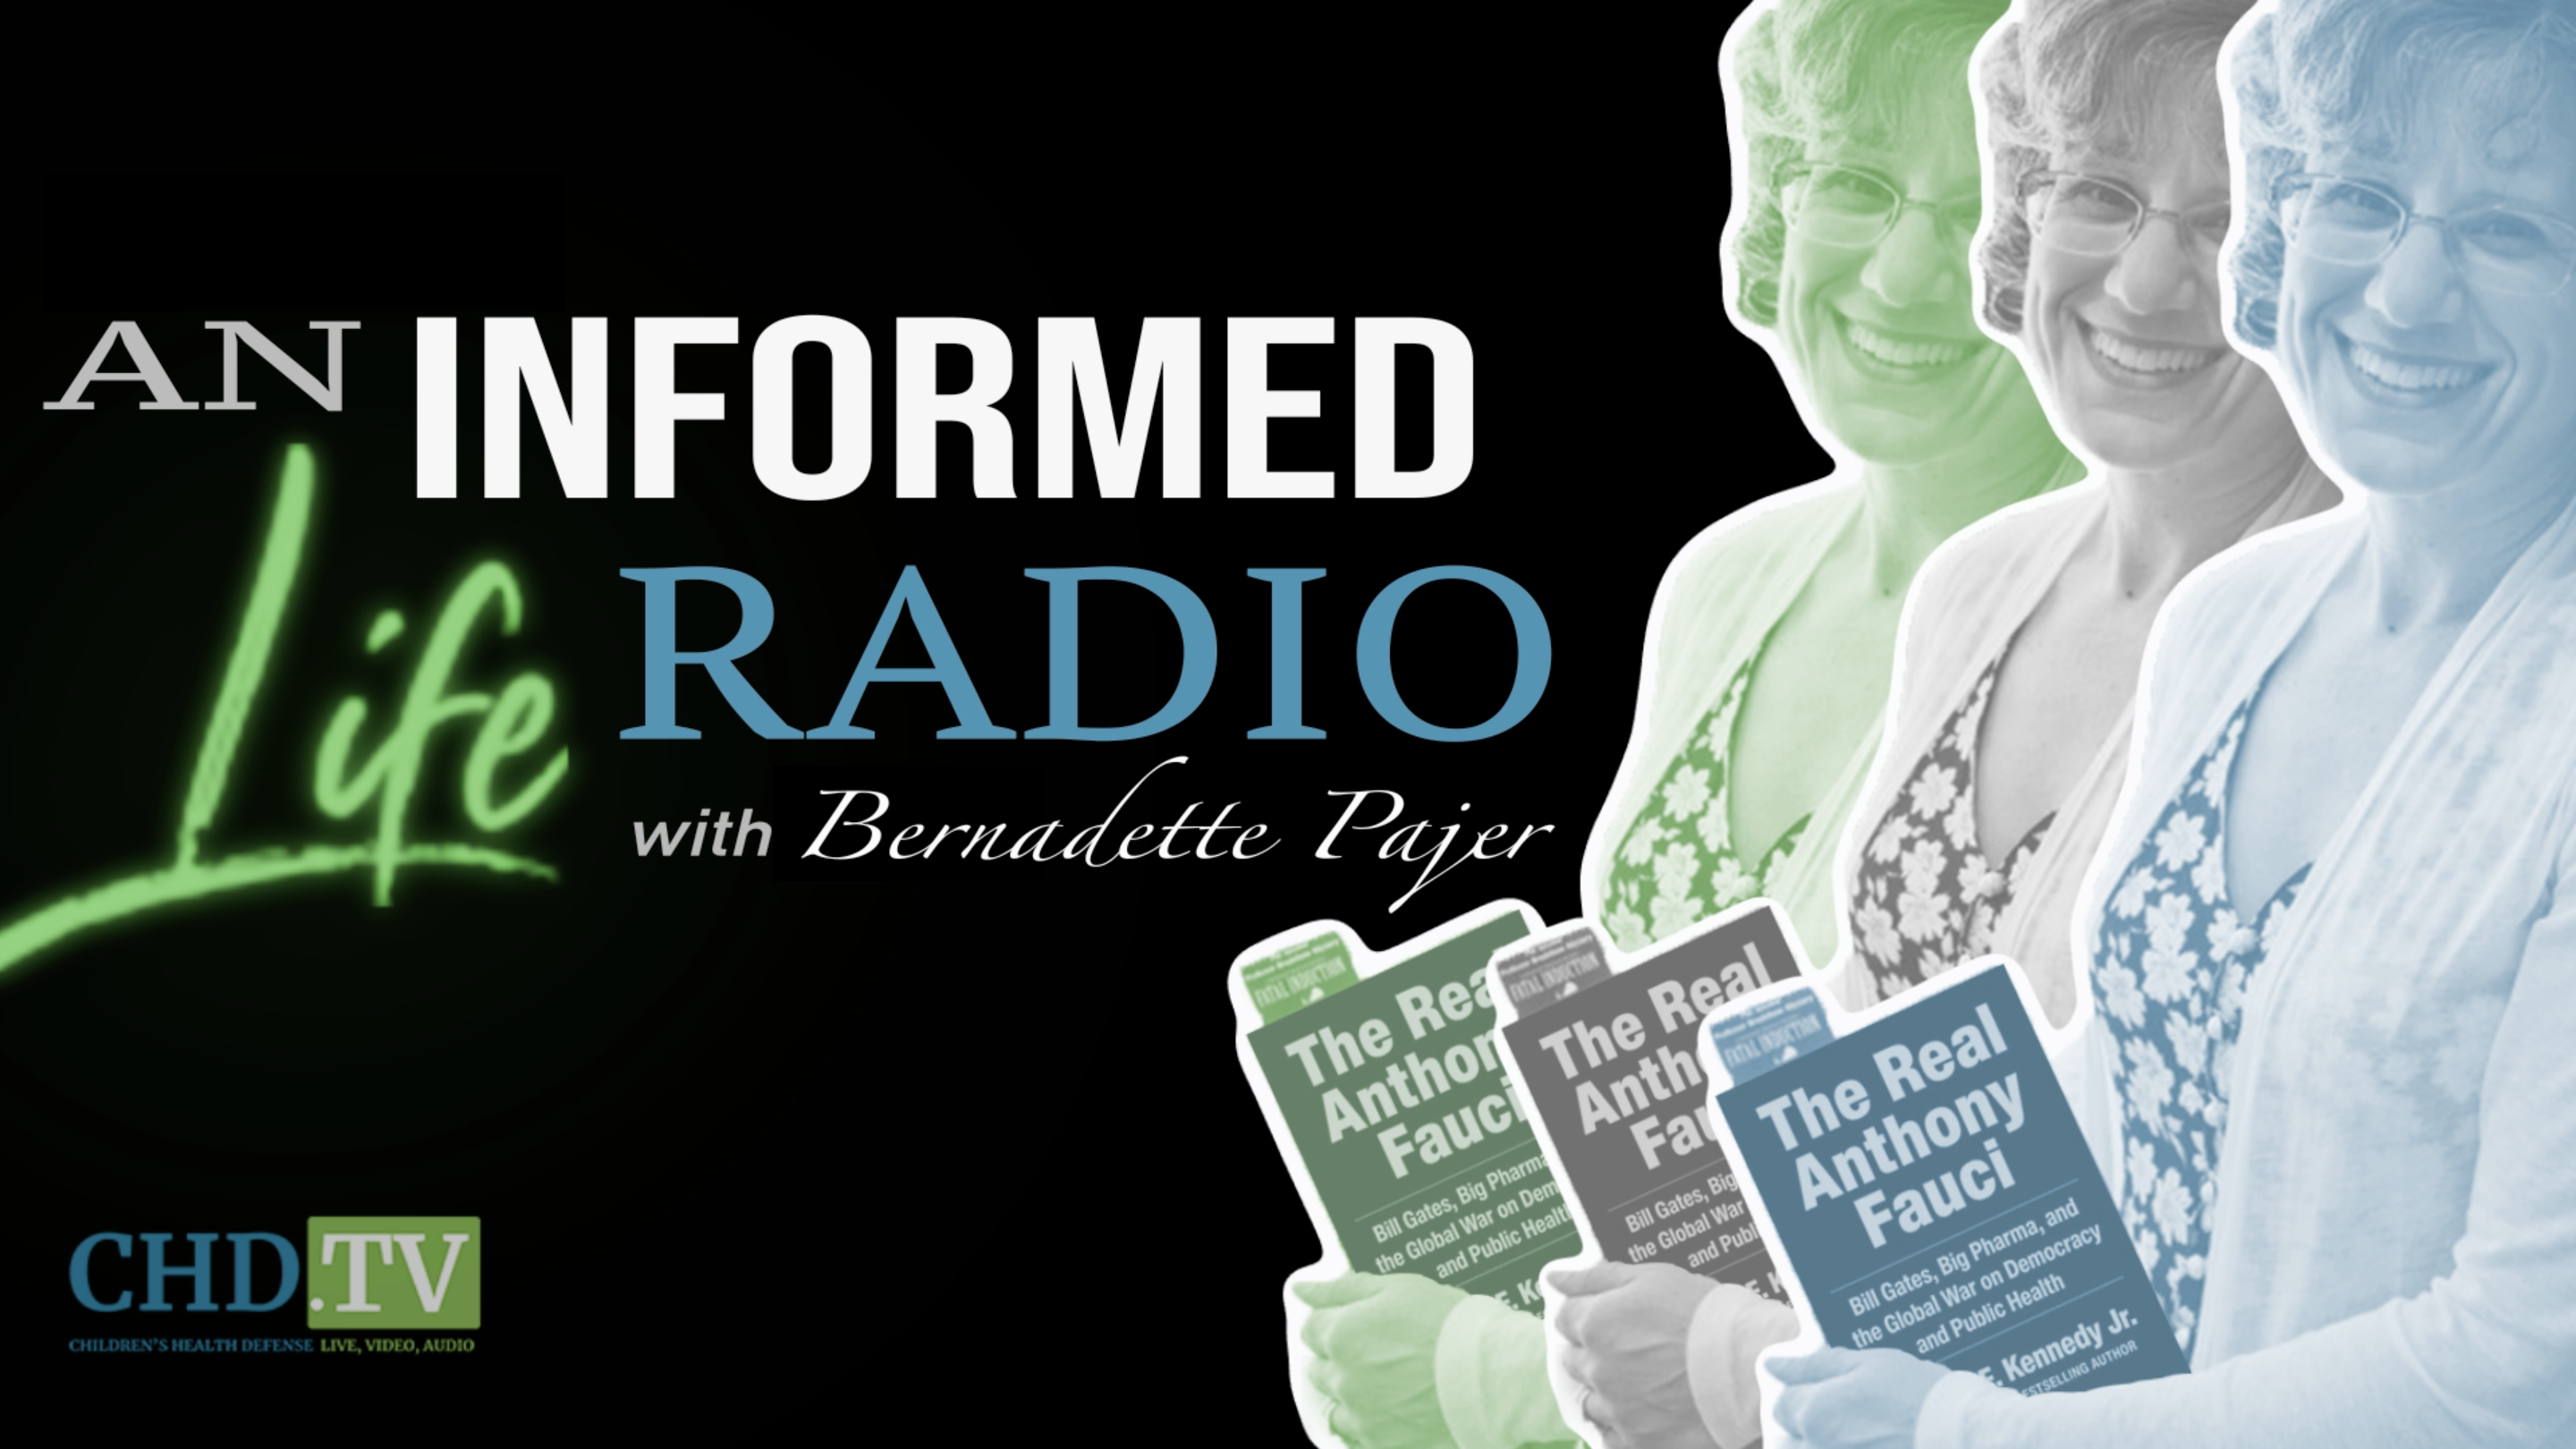 ‘An Informed Life Radio’ With Bernadette Pajer - CHD TV: Livestreaming Video & Audio